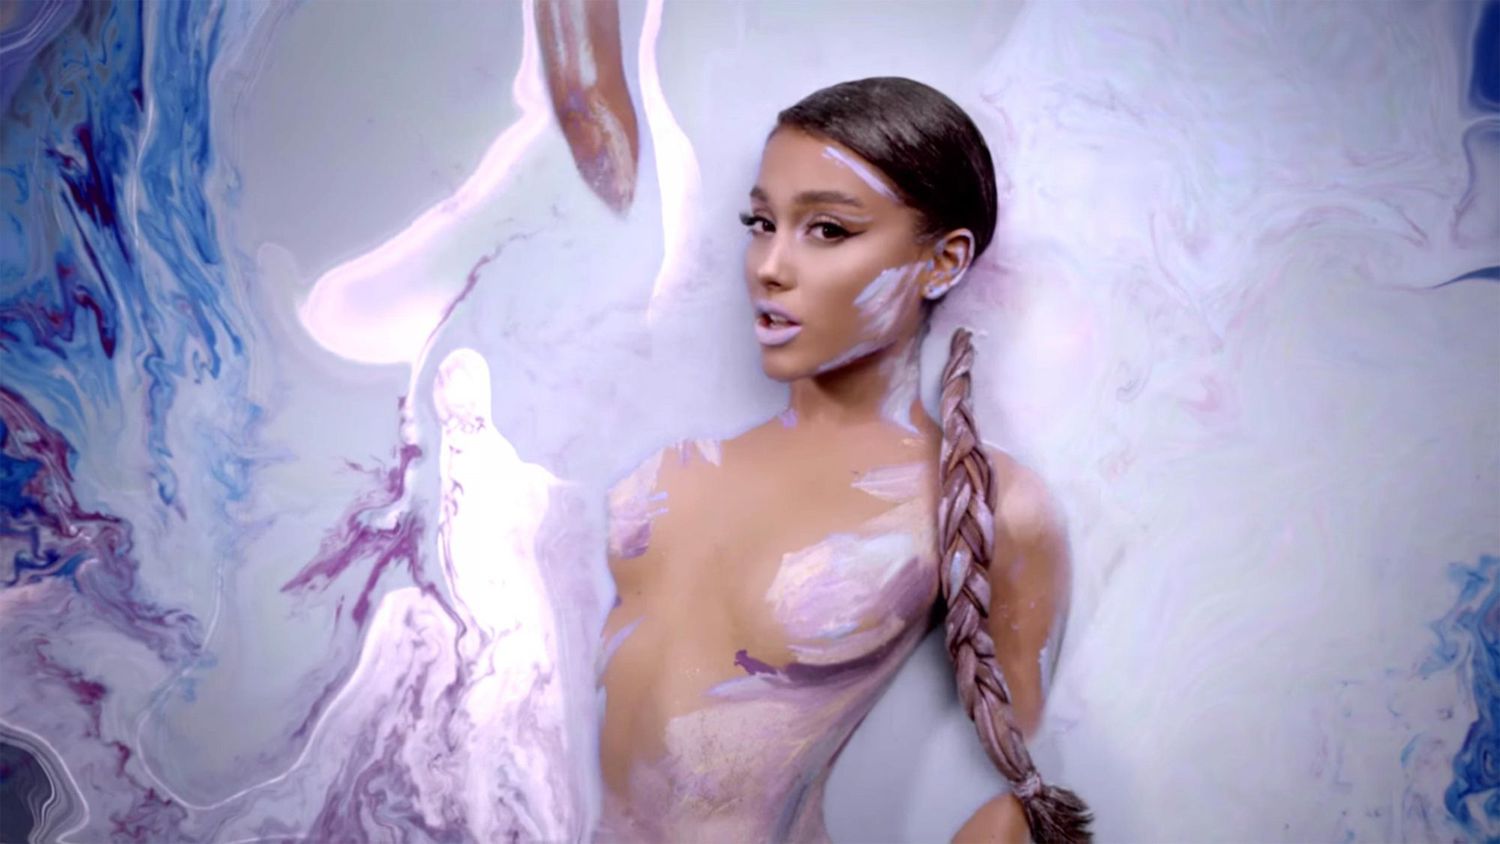 chris milla recommends ariana grande real nude photos pic